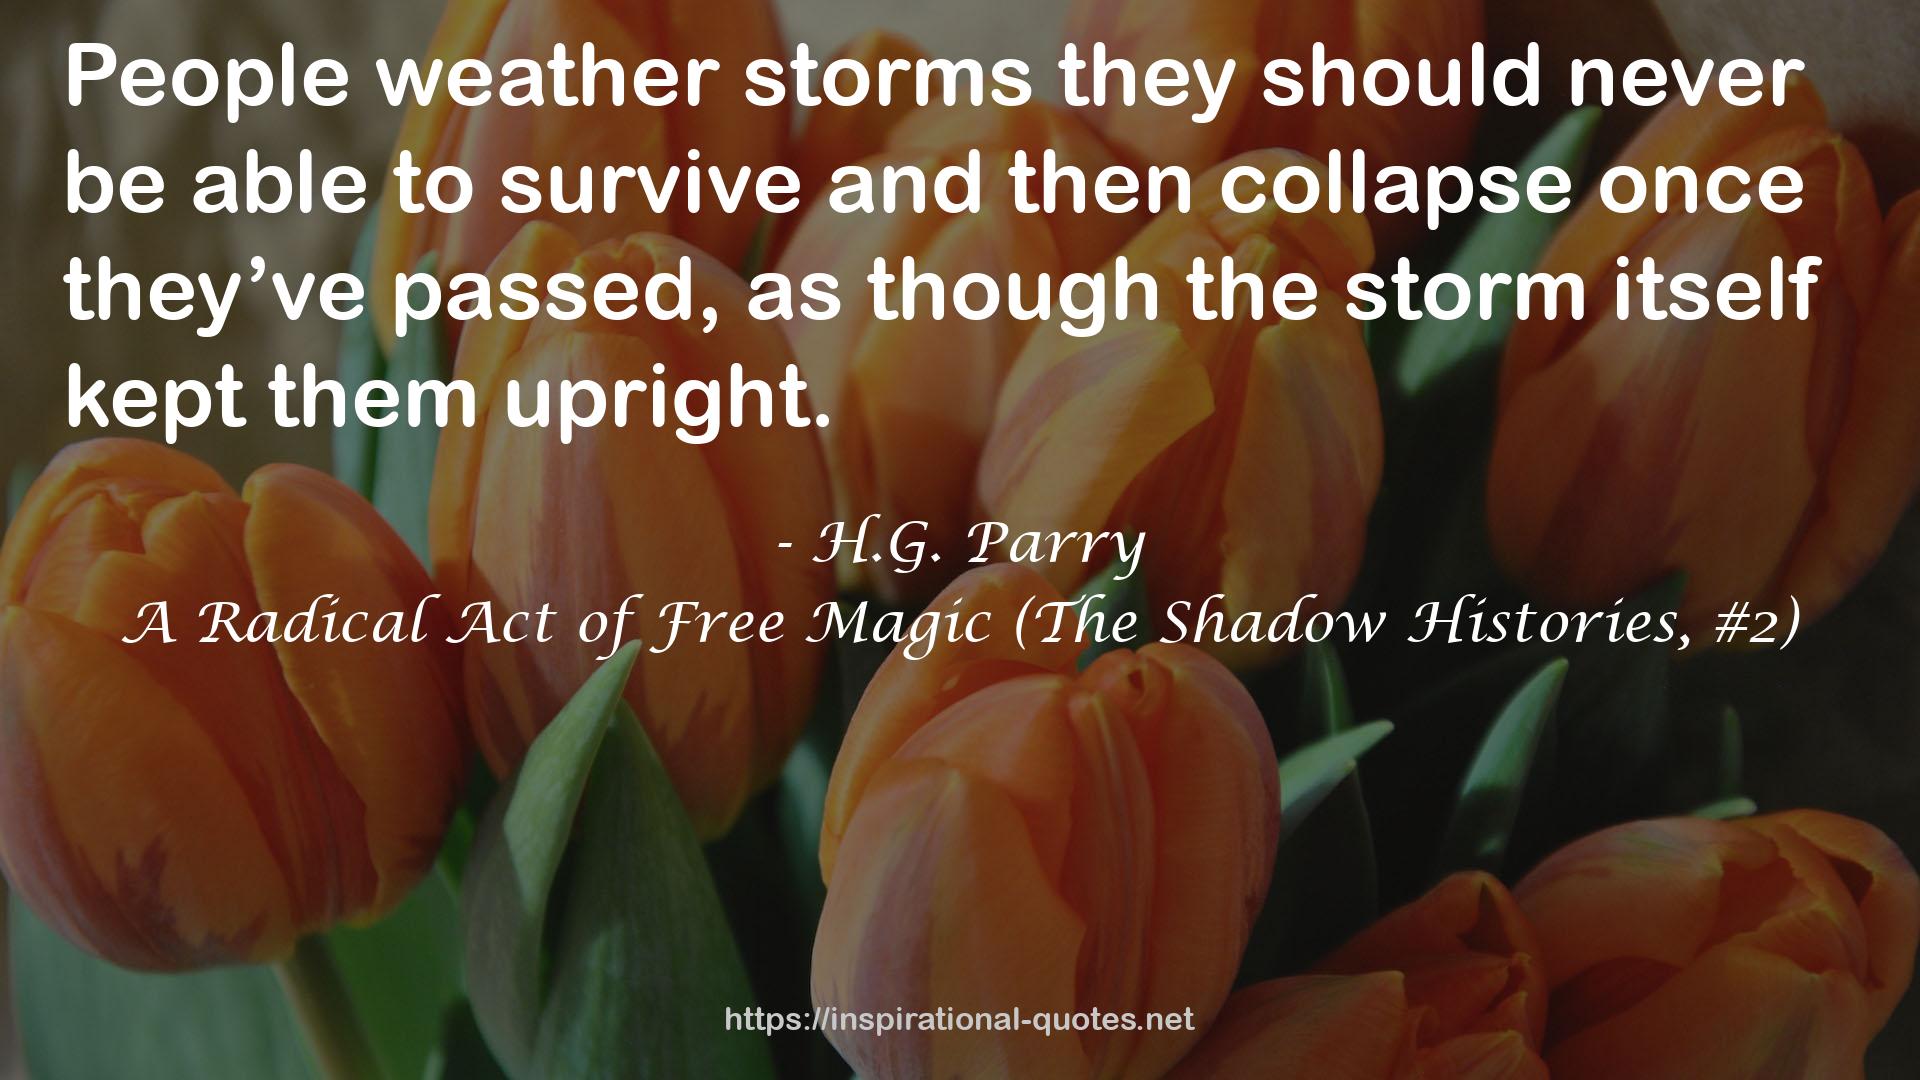 A Radical Act of Free Magic (The Shadow Histories, #2) QUOTES